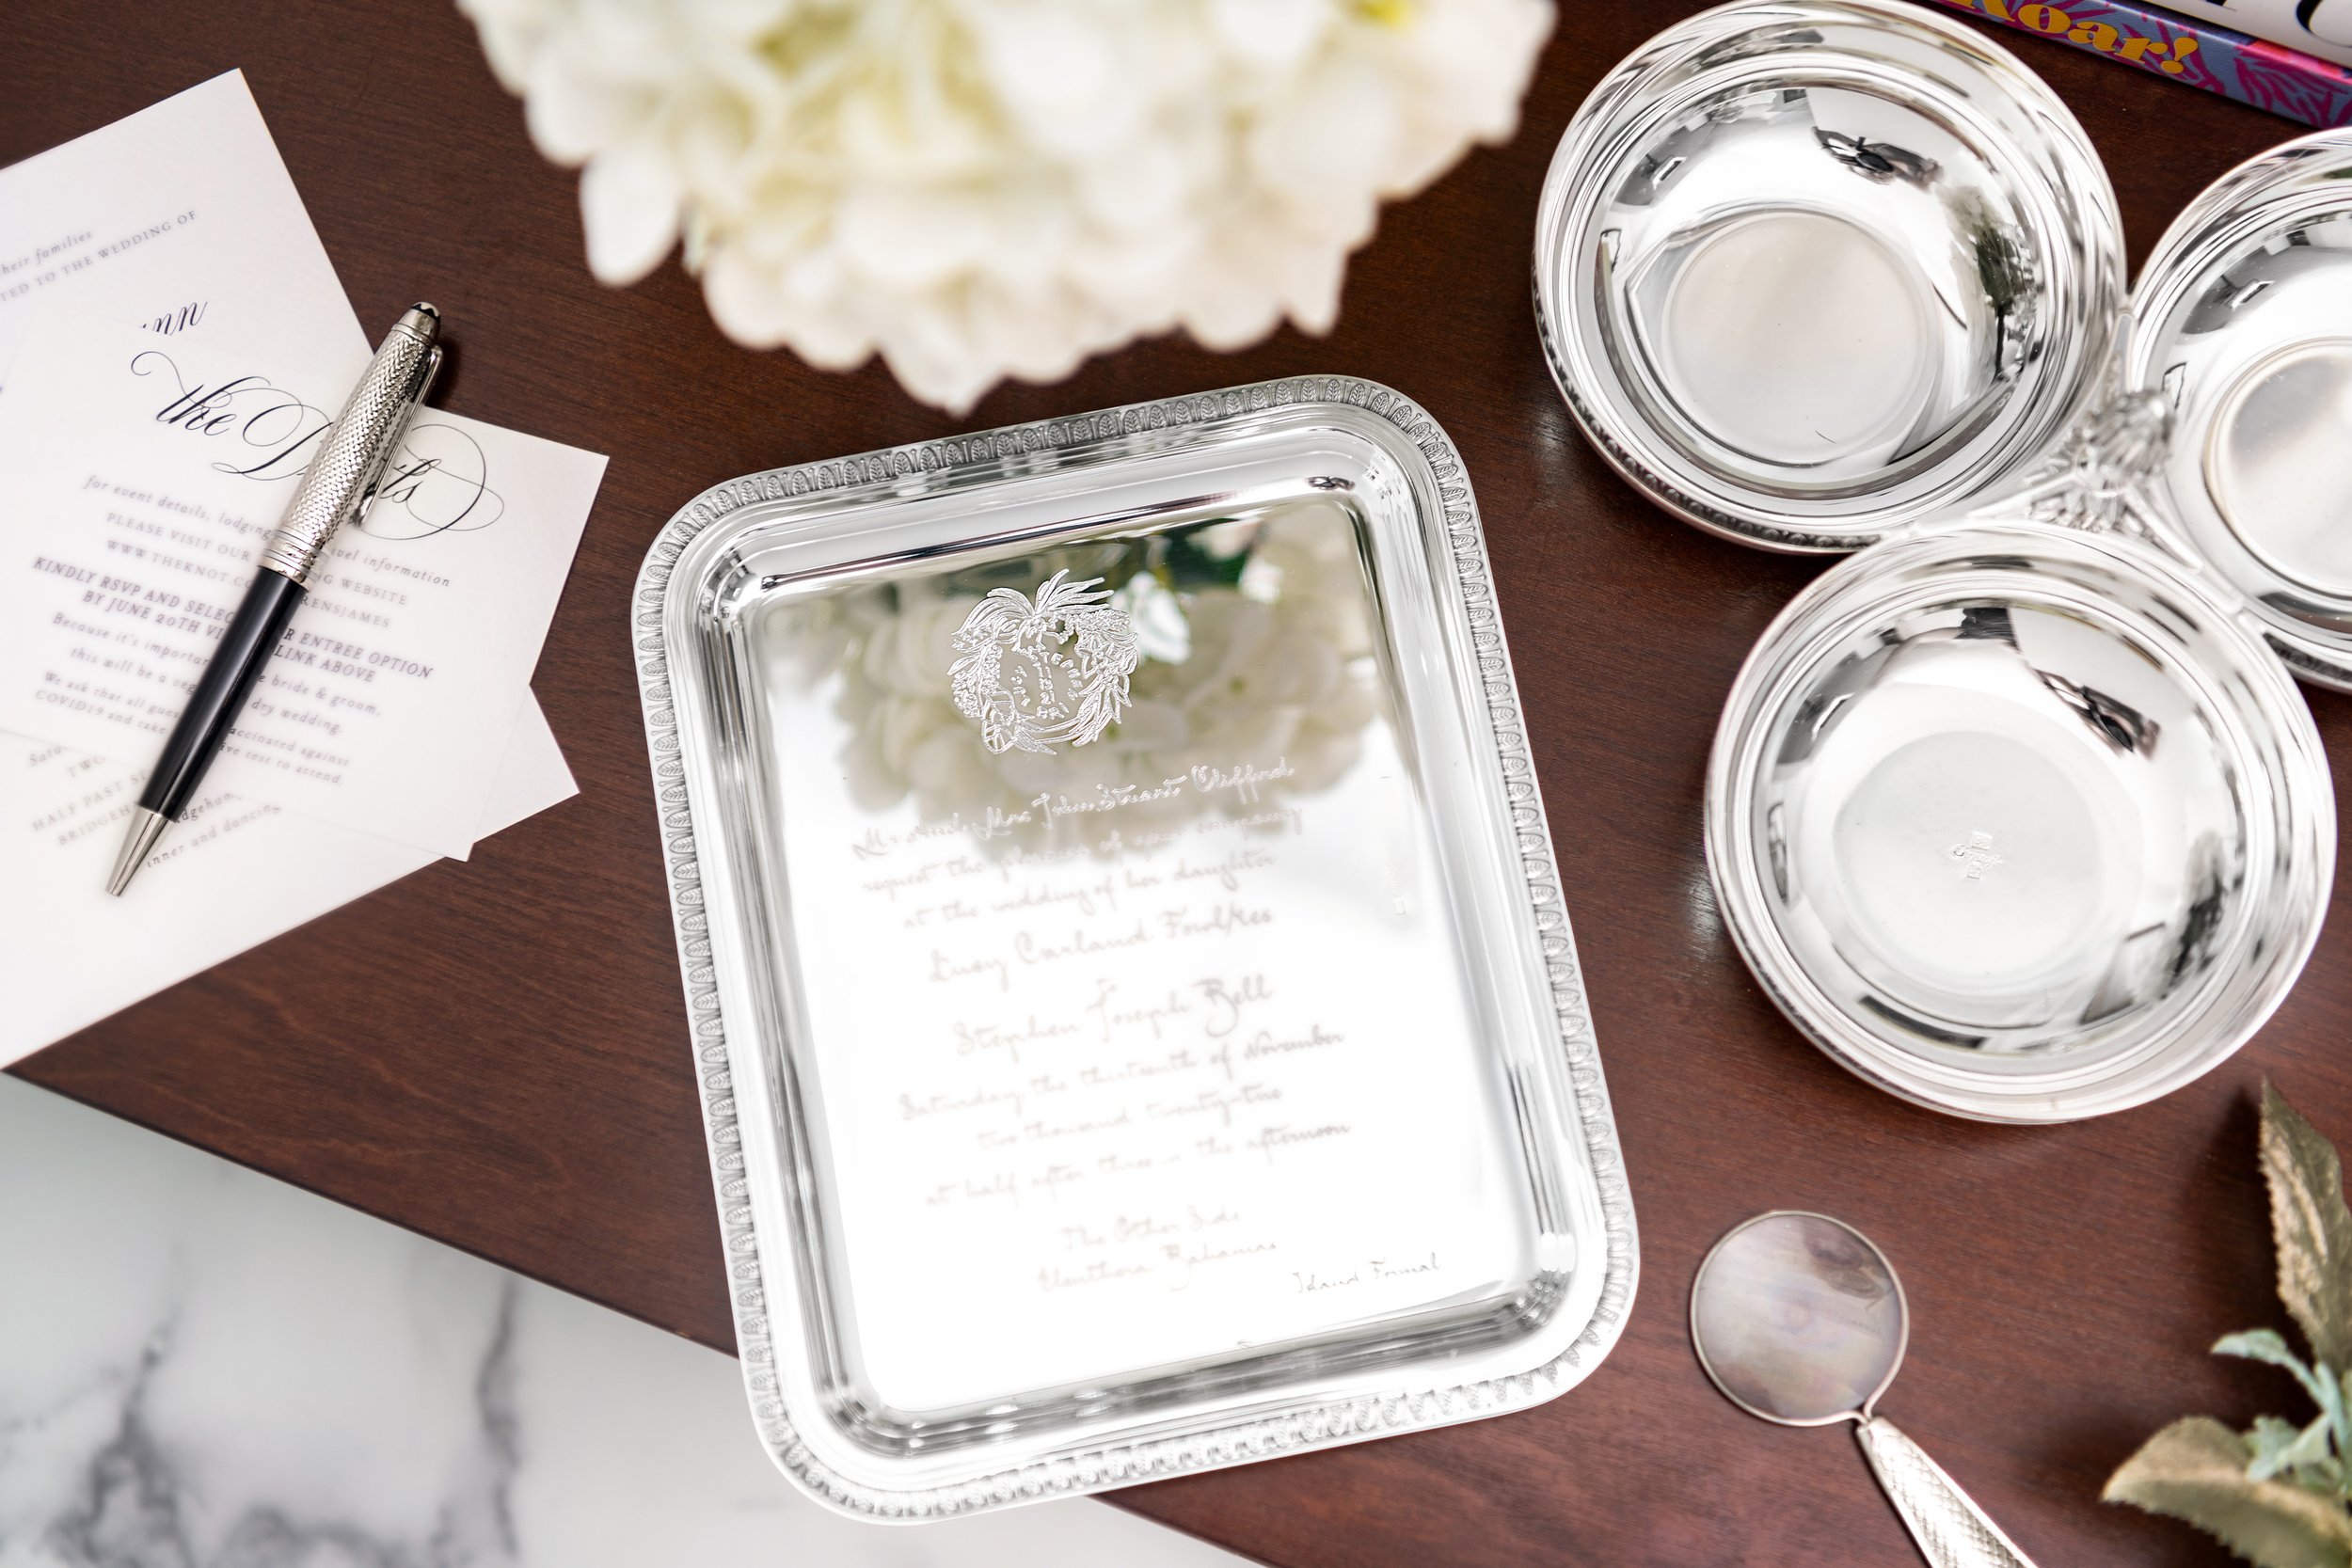 Christofle Custom Tray with Wedding Invite - photo by Andrew Werner .jpg